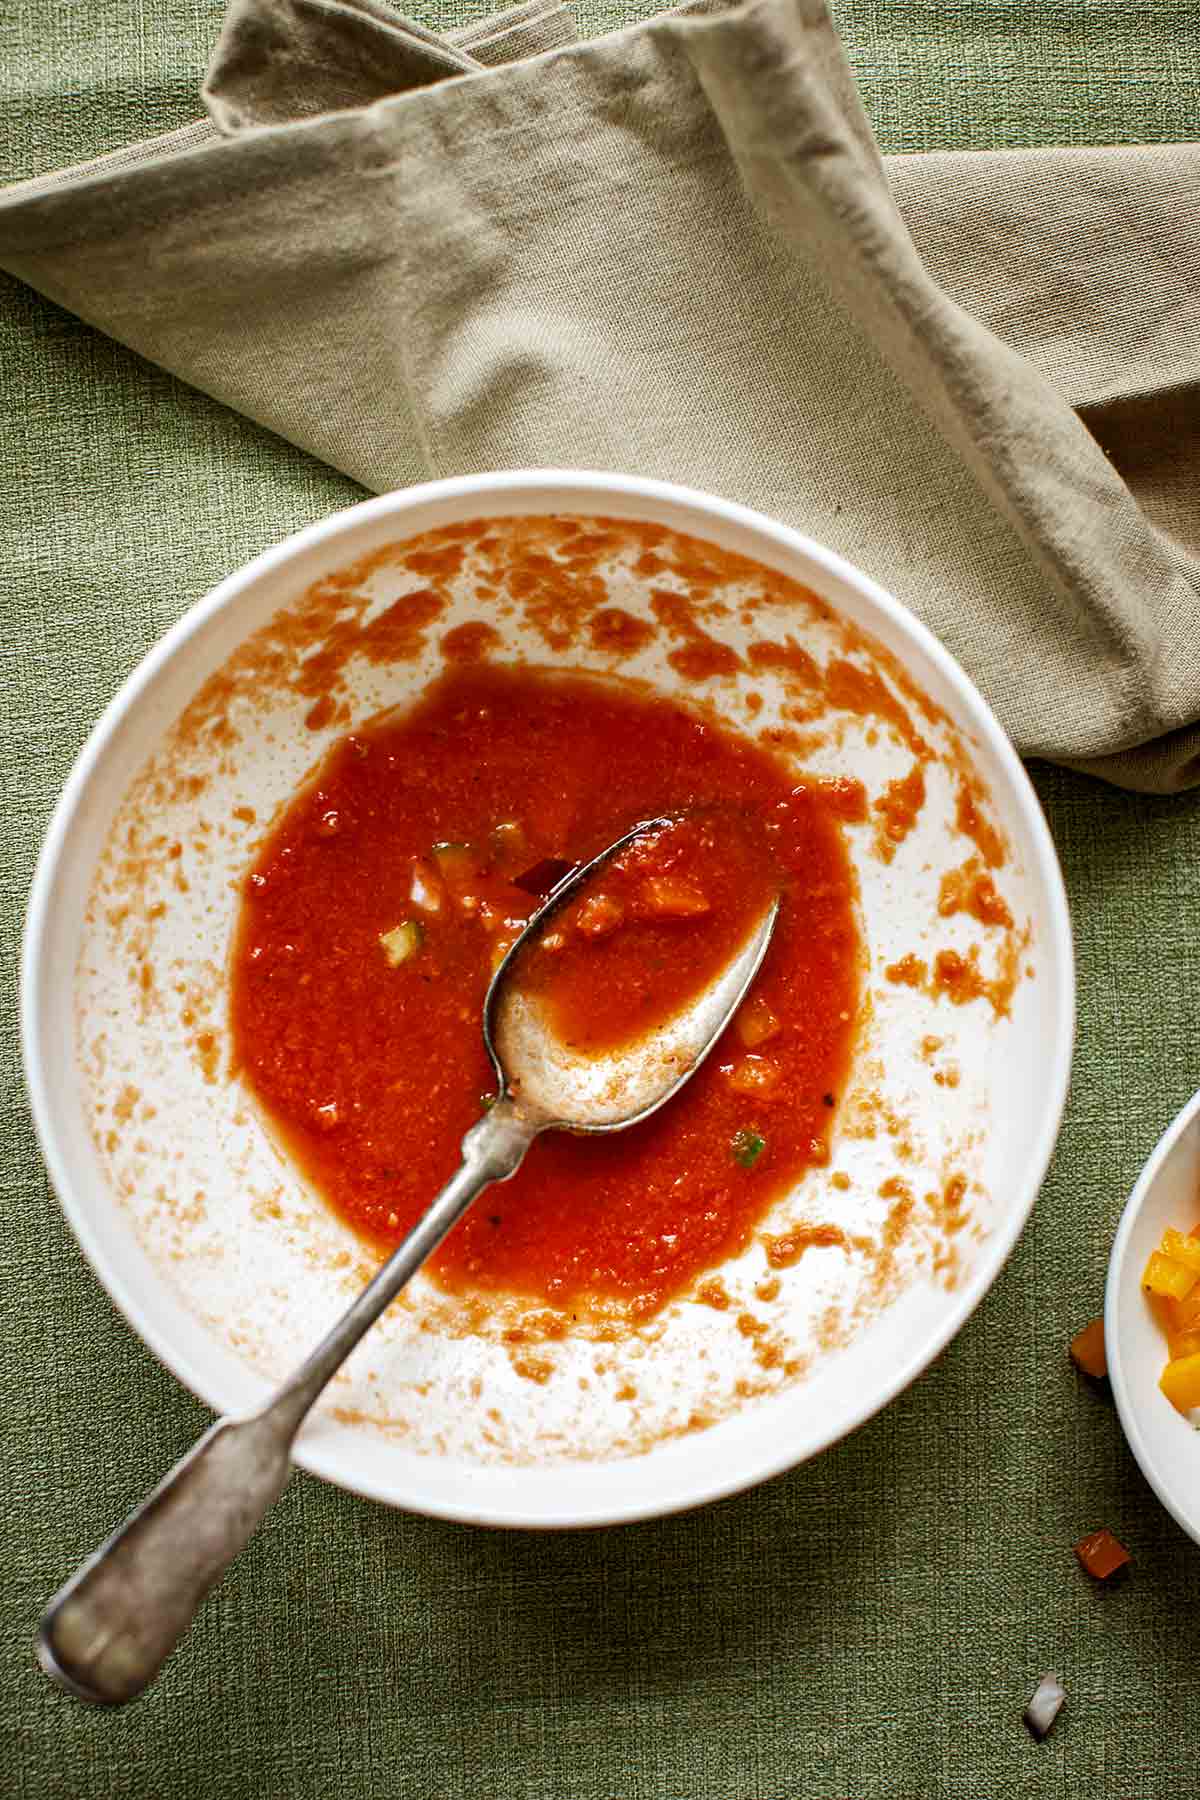 An almost empty bowl of Spanish gazpacho with a spoon resting inside.